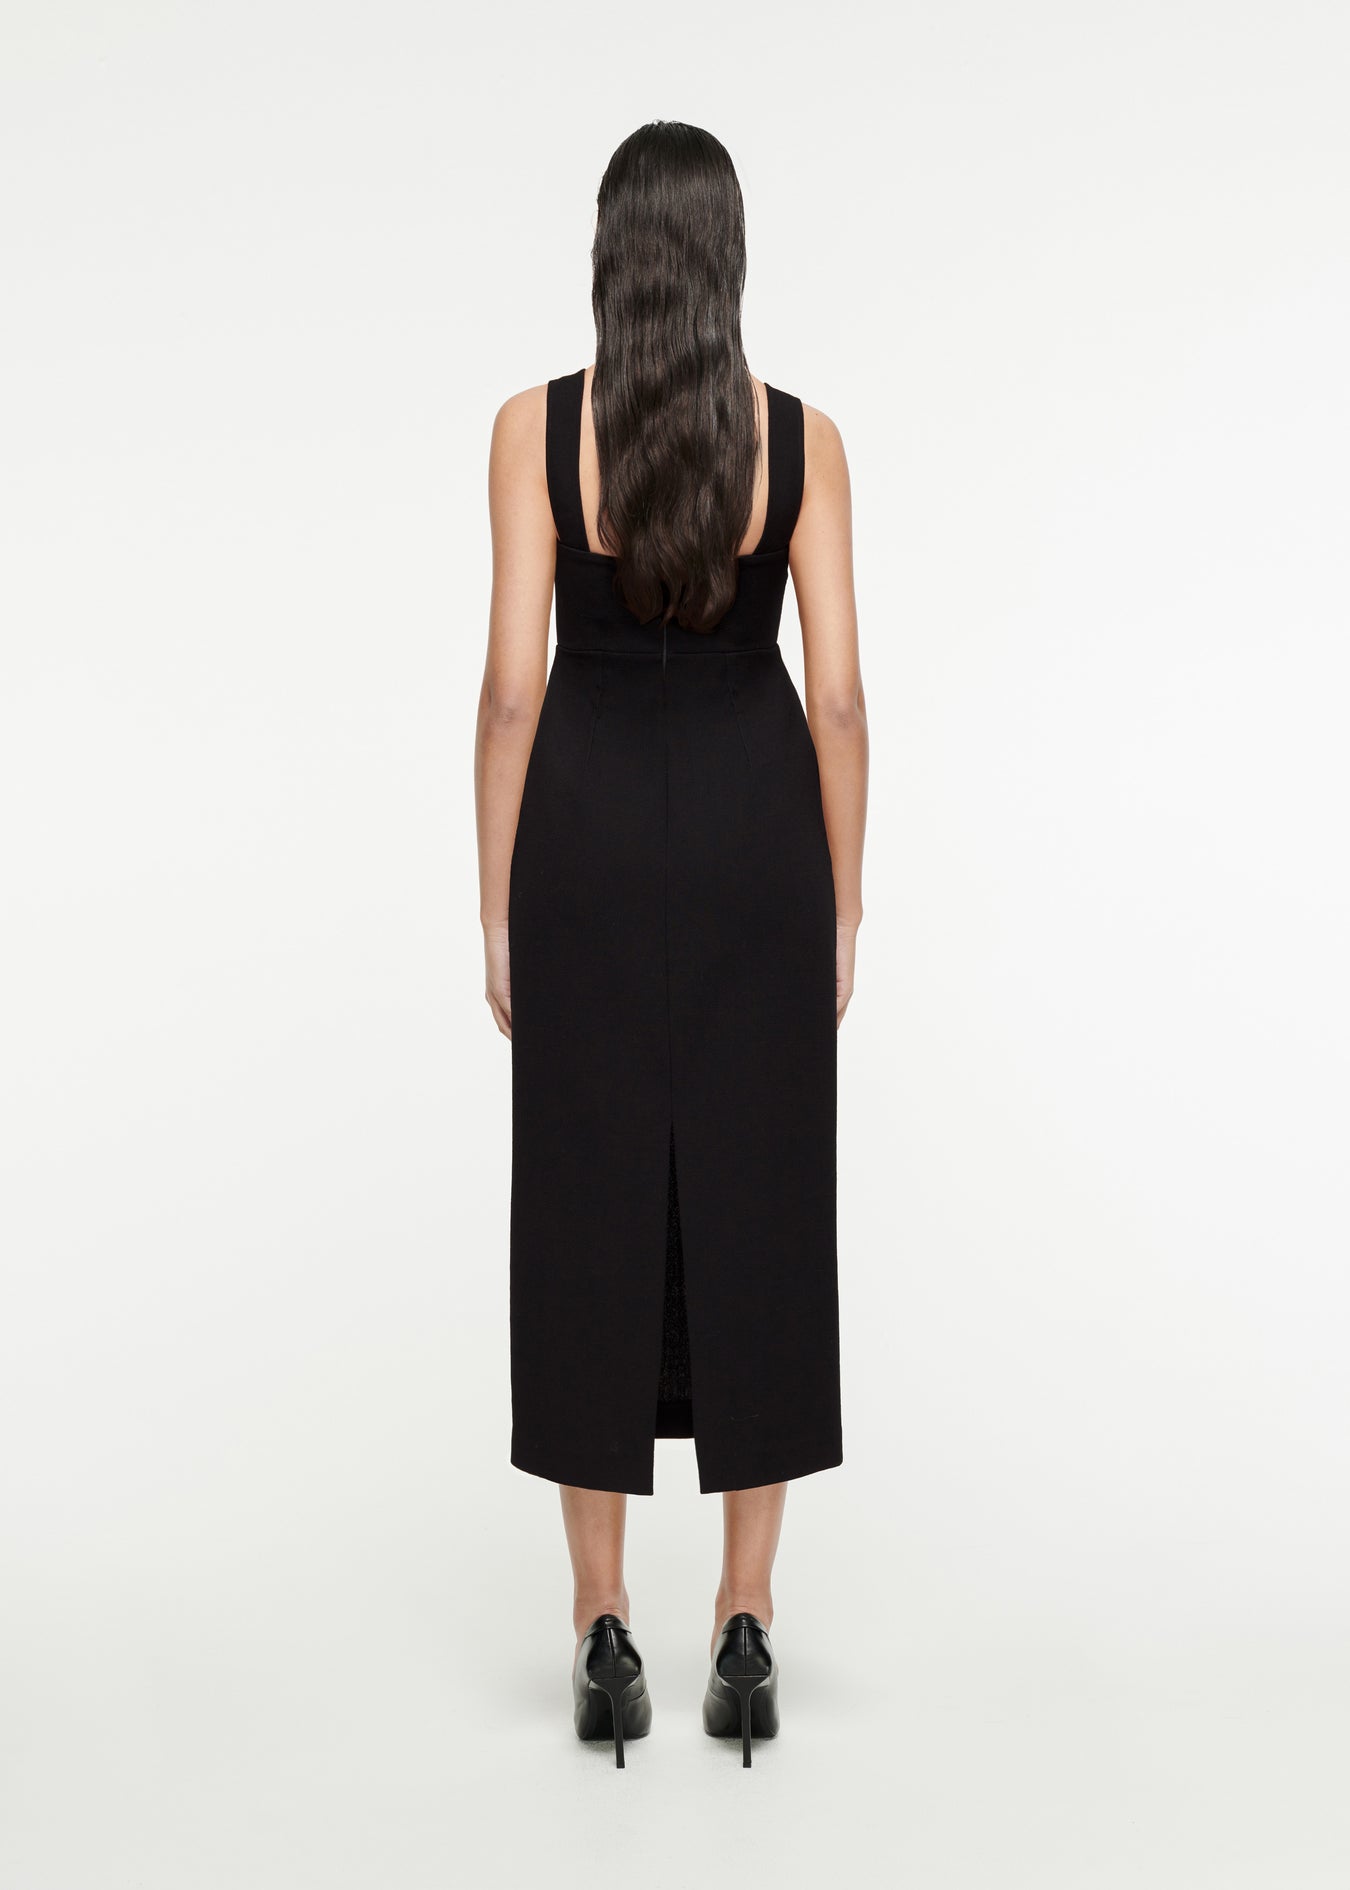 The back of a woman wearing the Wool Crepe Midi Dress in Black